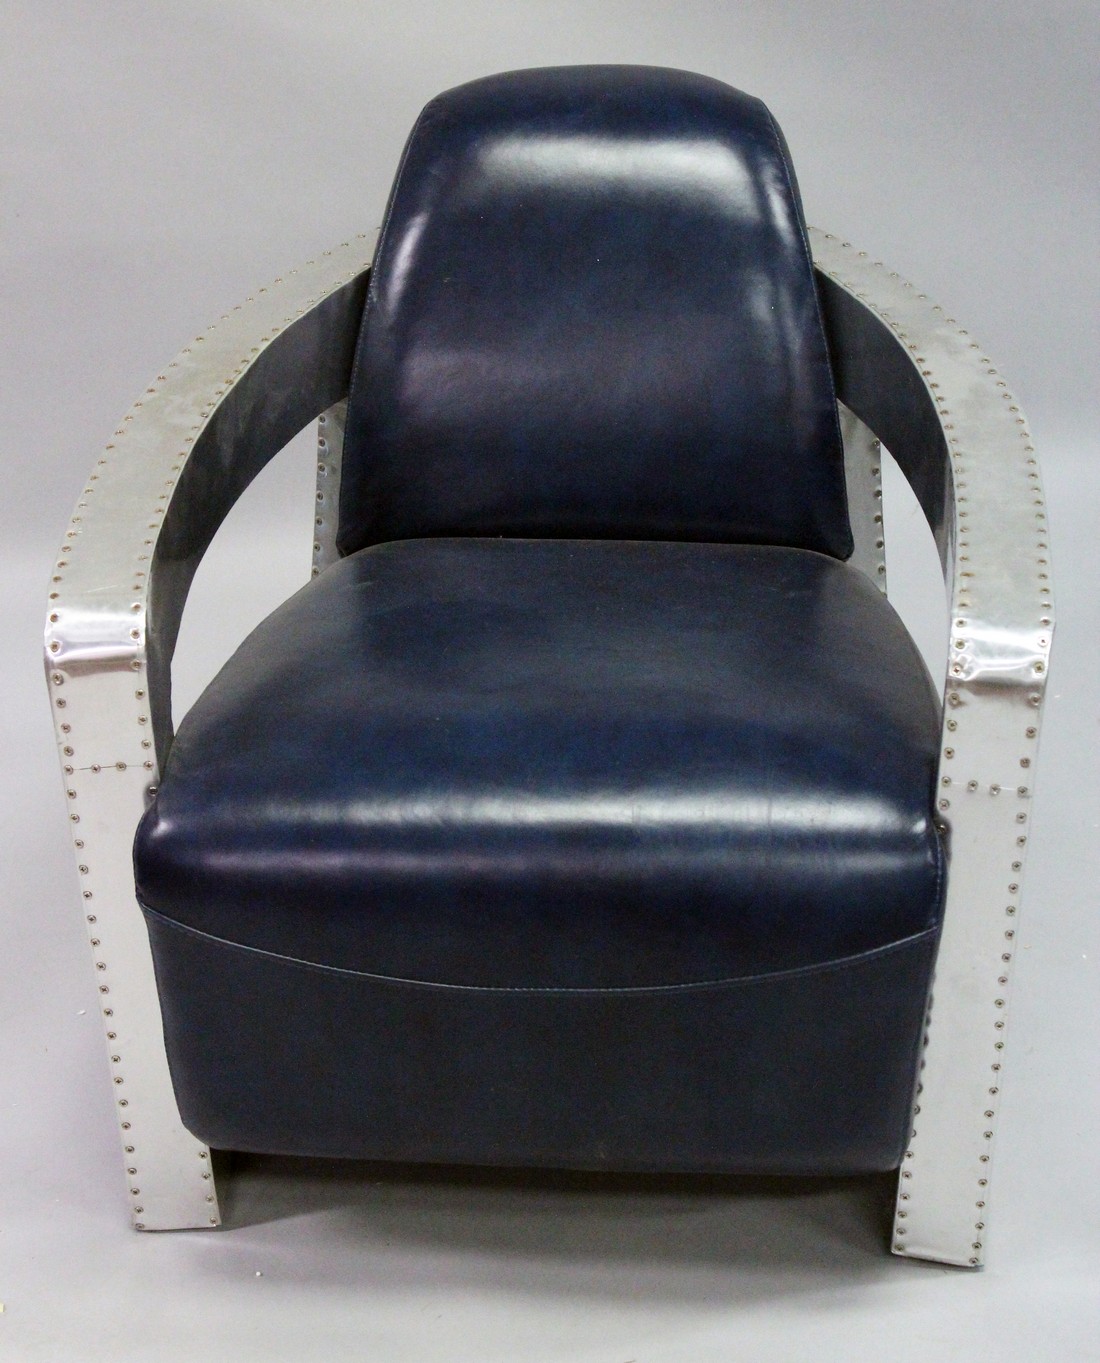 AN ART DECO DESIGN METAL AND LEATHER ARMCHAIR. - Image 2 of 4